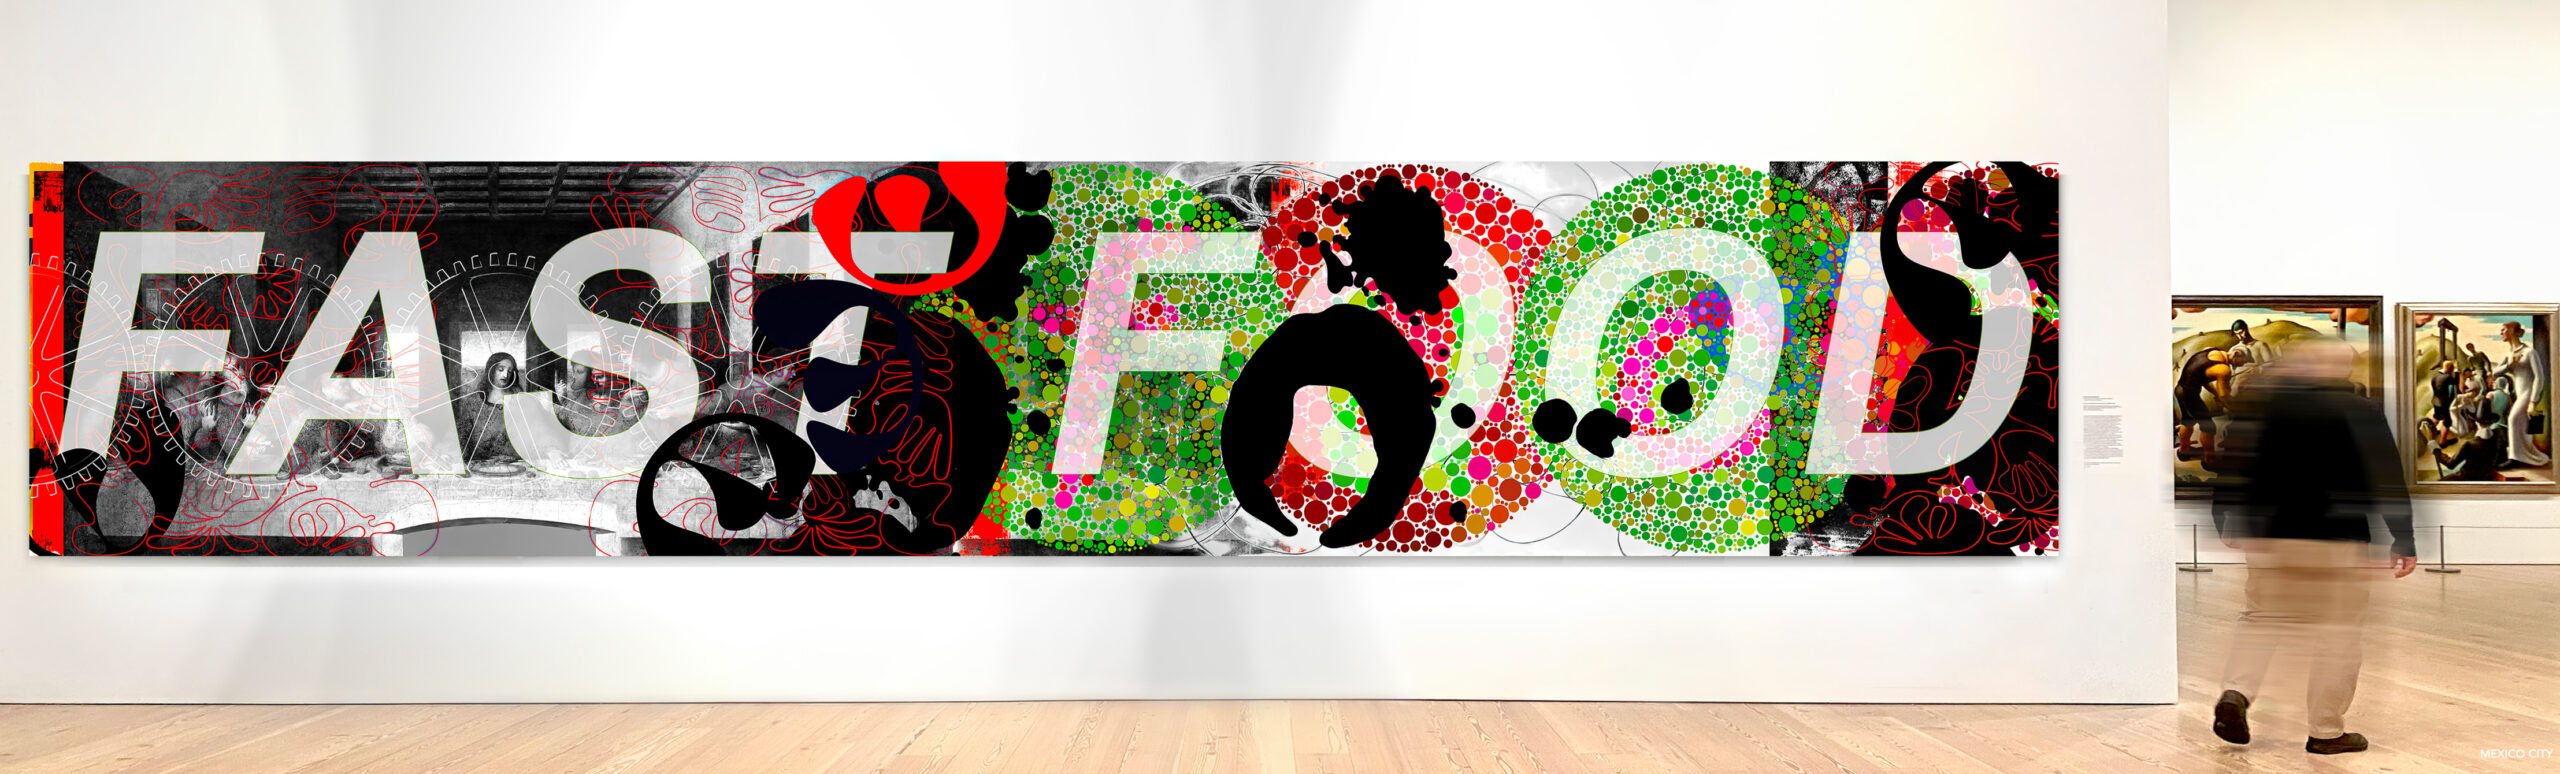 Robert Santoré “FAST FOOD” 60 x 306in (152.4 x 777.24cm) Oil, oils stick, military & industrial enamels, wax, charcoal & conte crayon, 24ct Gold leaf on birch panels with micro-layer clay ground